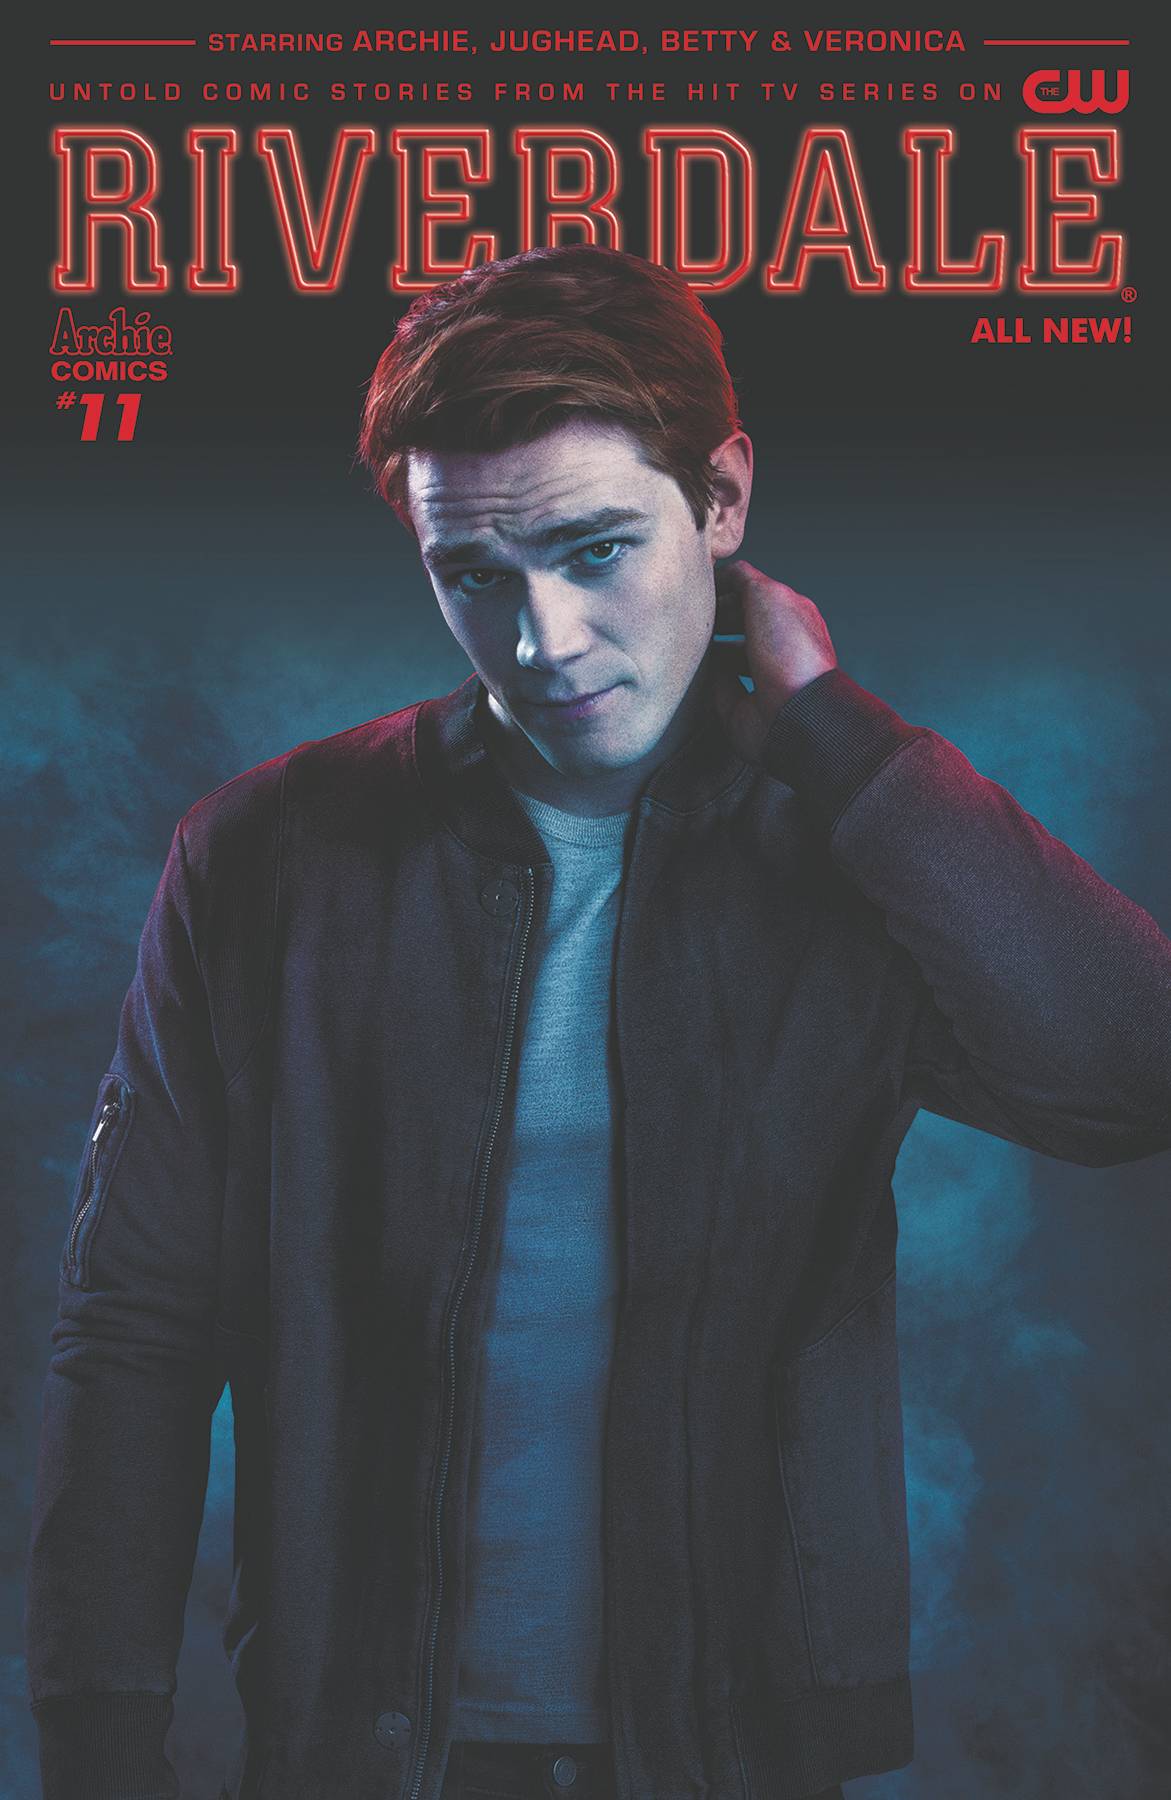 Riverdale (Ongoing) #11 Cover A Cw Photo